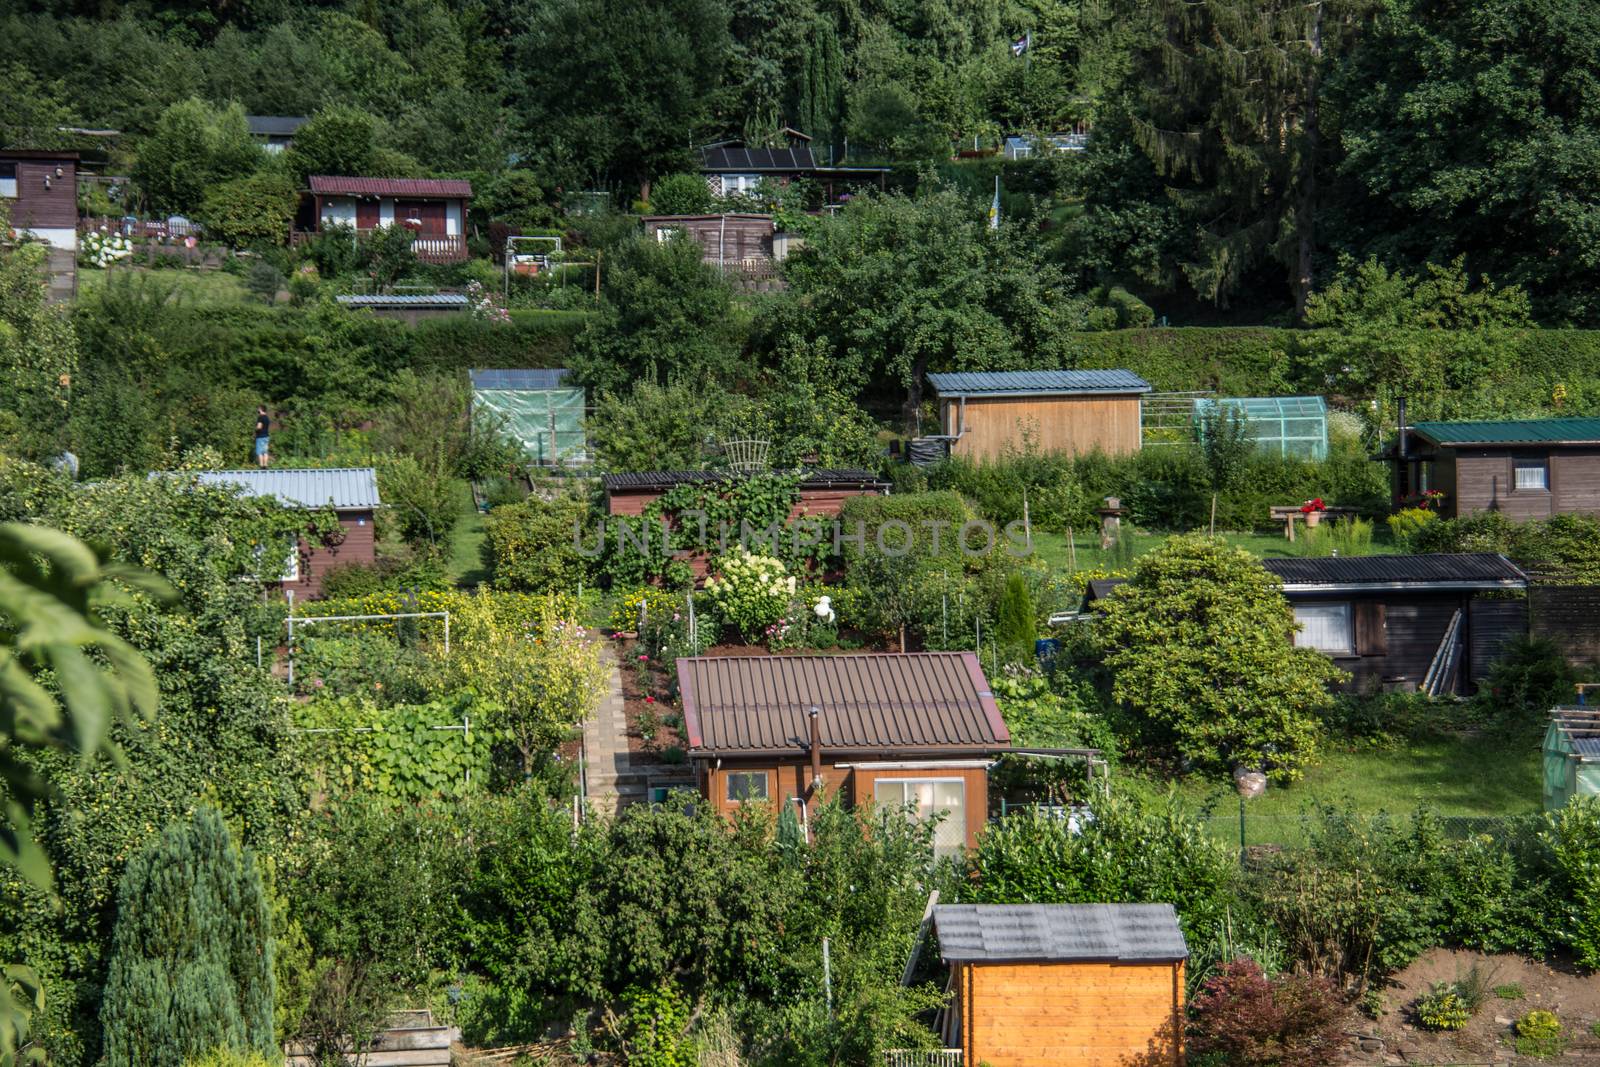 Allotments with houses on a slope